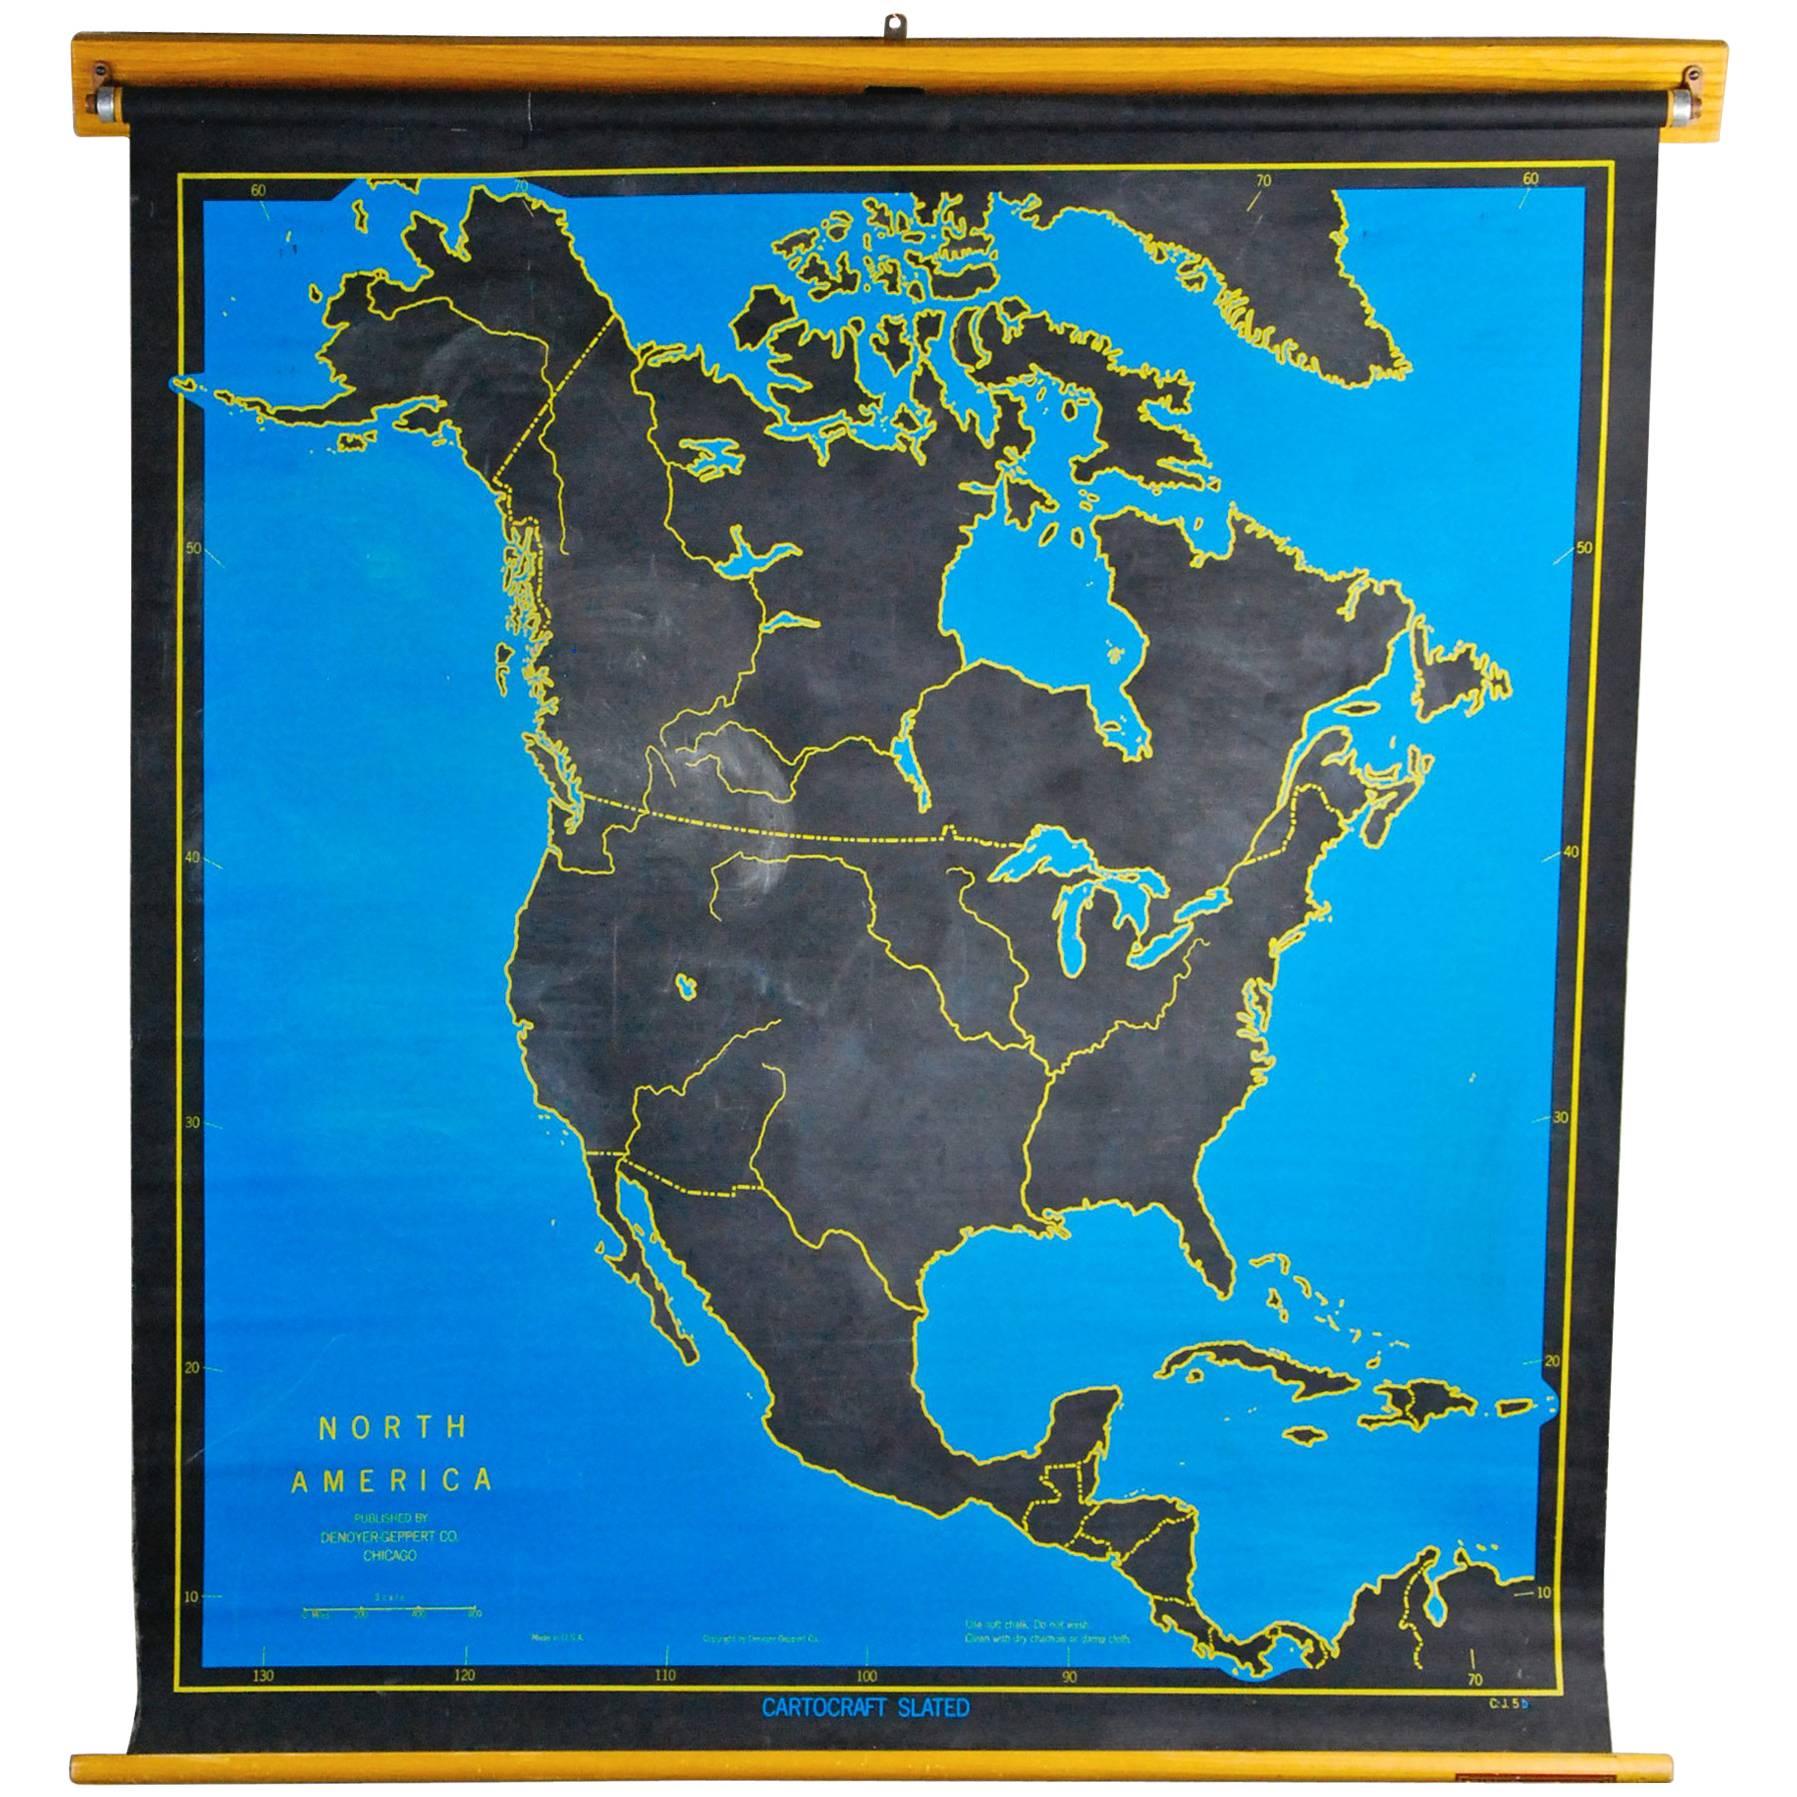 1960 Vintage Pull Down Cartography Chalkboard Map of North America